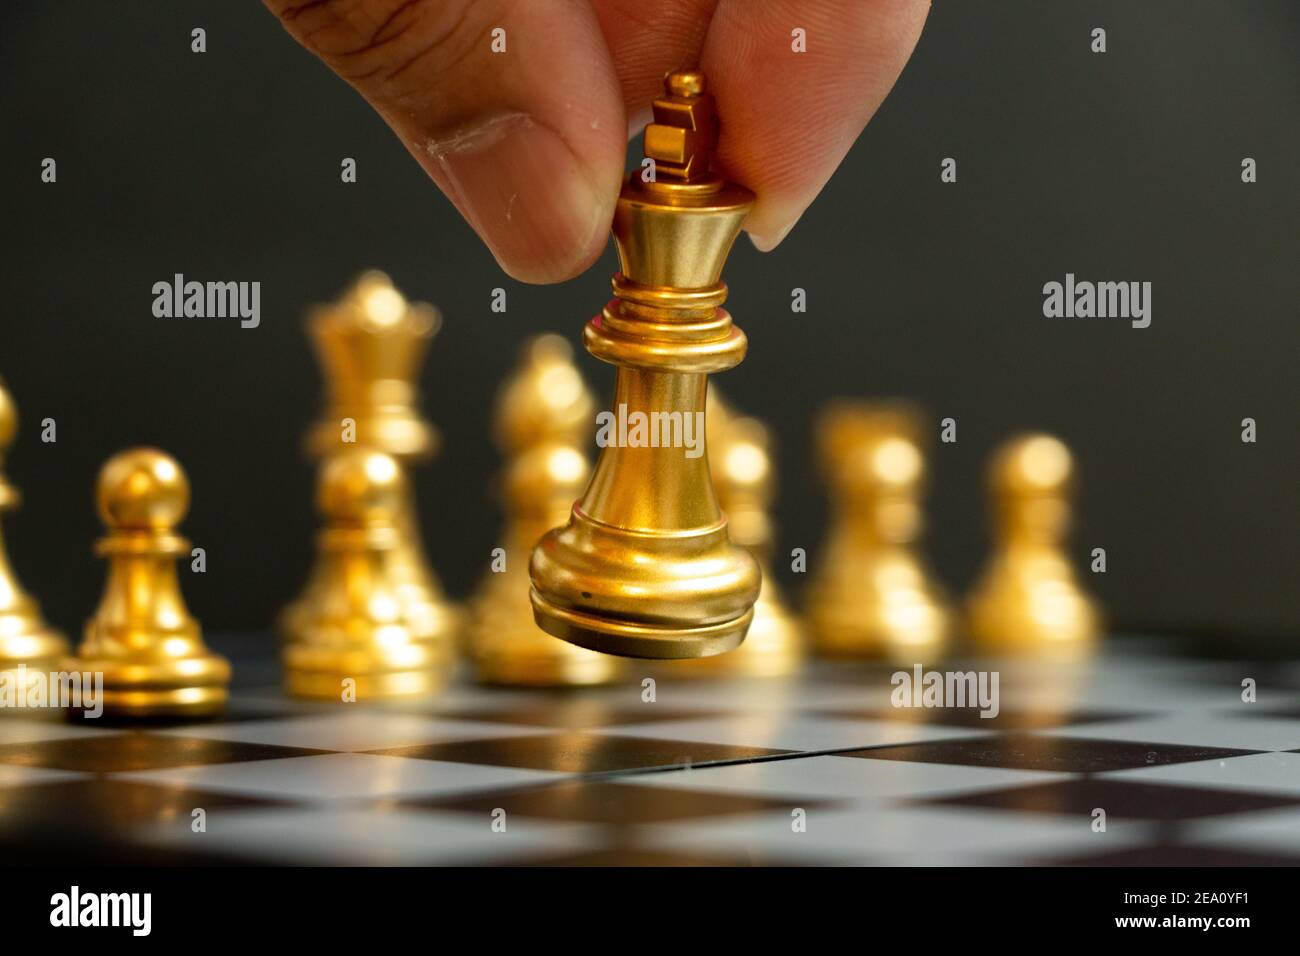 Key Strategy Person Playing Chess And Taking Next Move